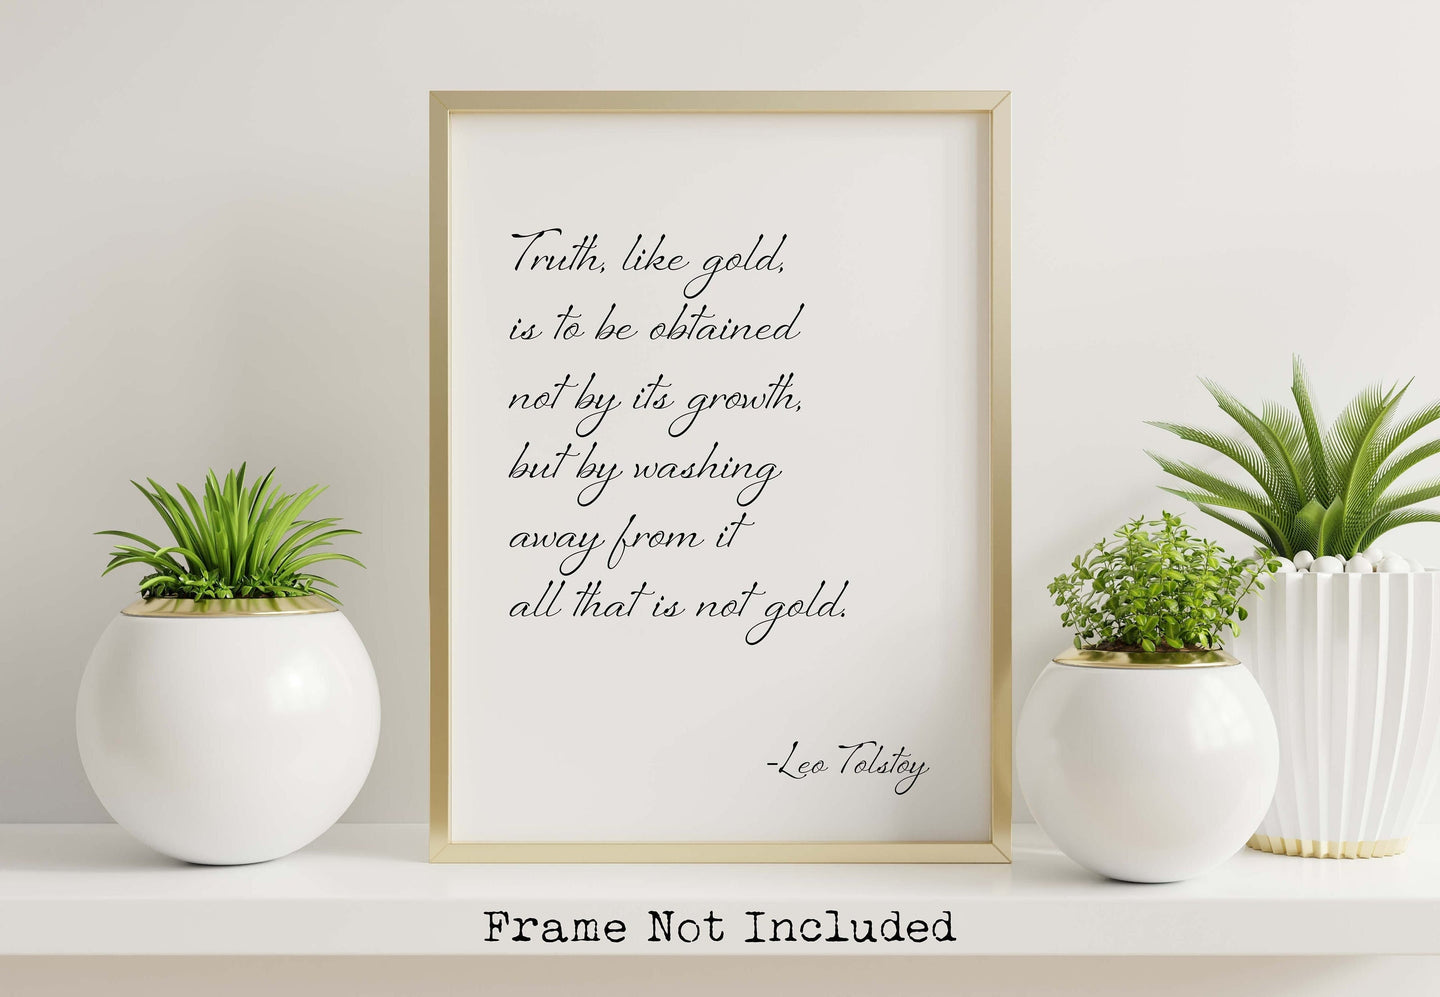 Leo Tolstoy Quote - Truth like gold is to be obtained not by its growth, all that is not gold - Print for library office wall Art UNFRAMED